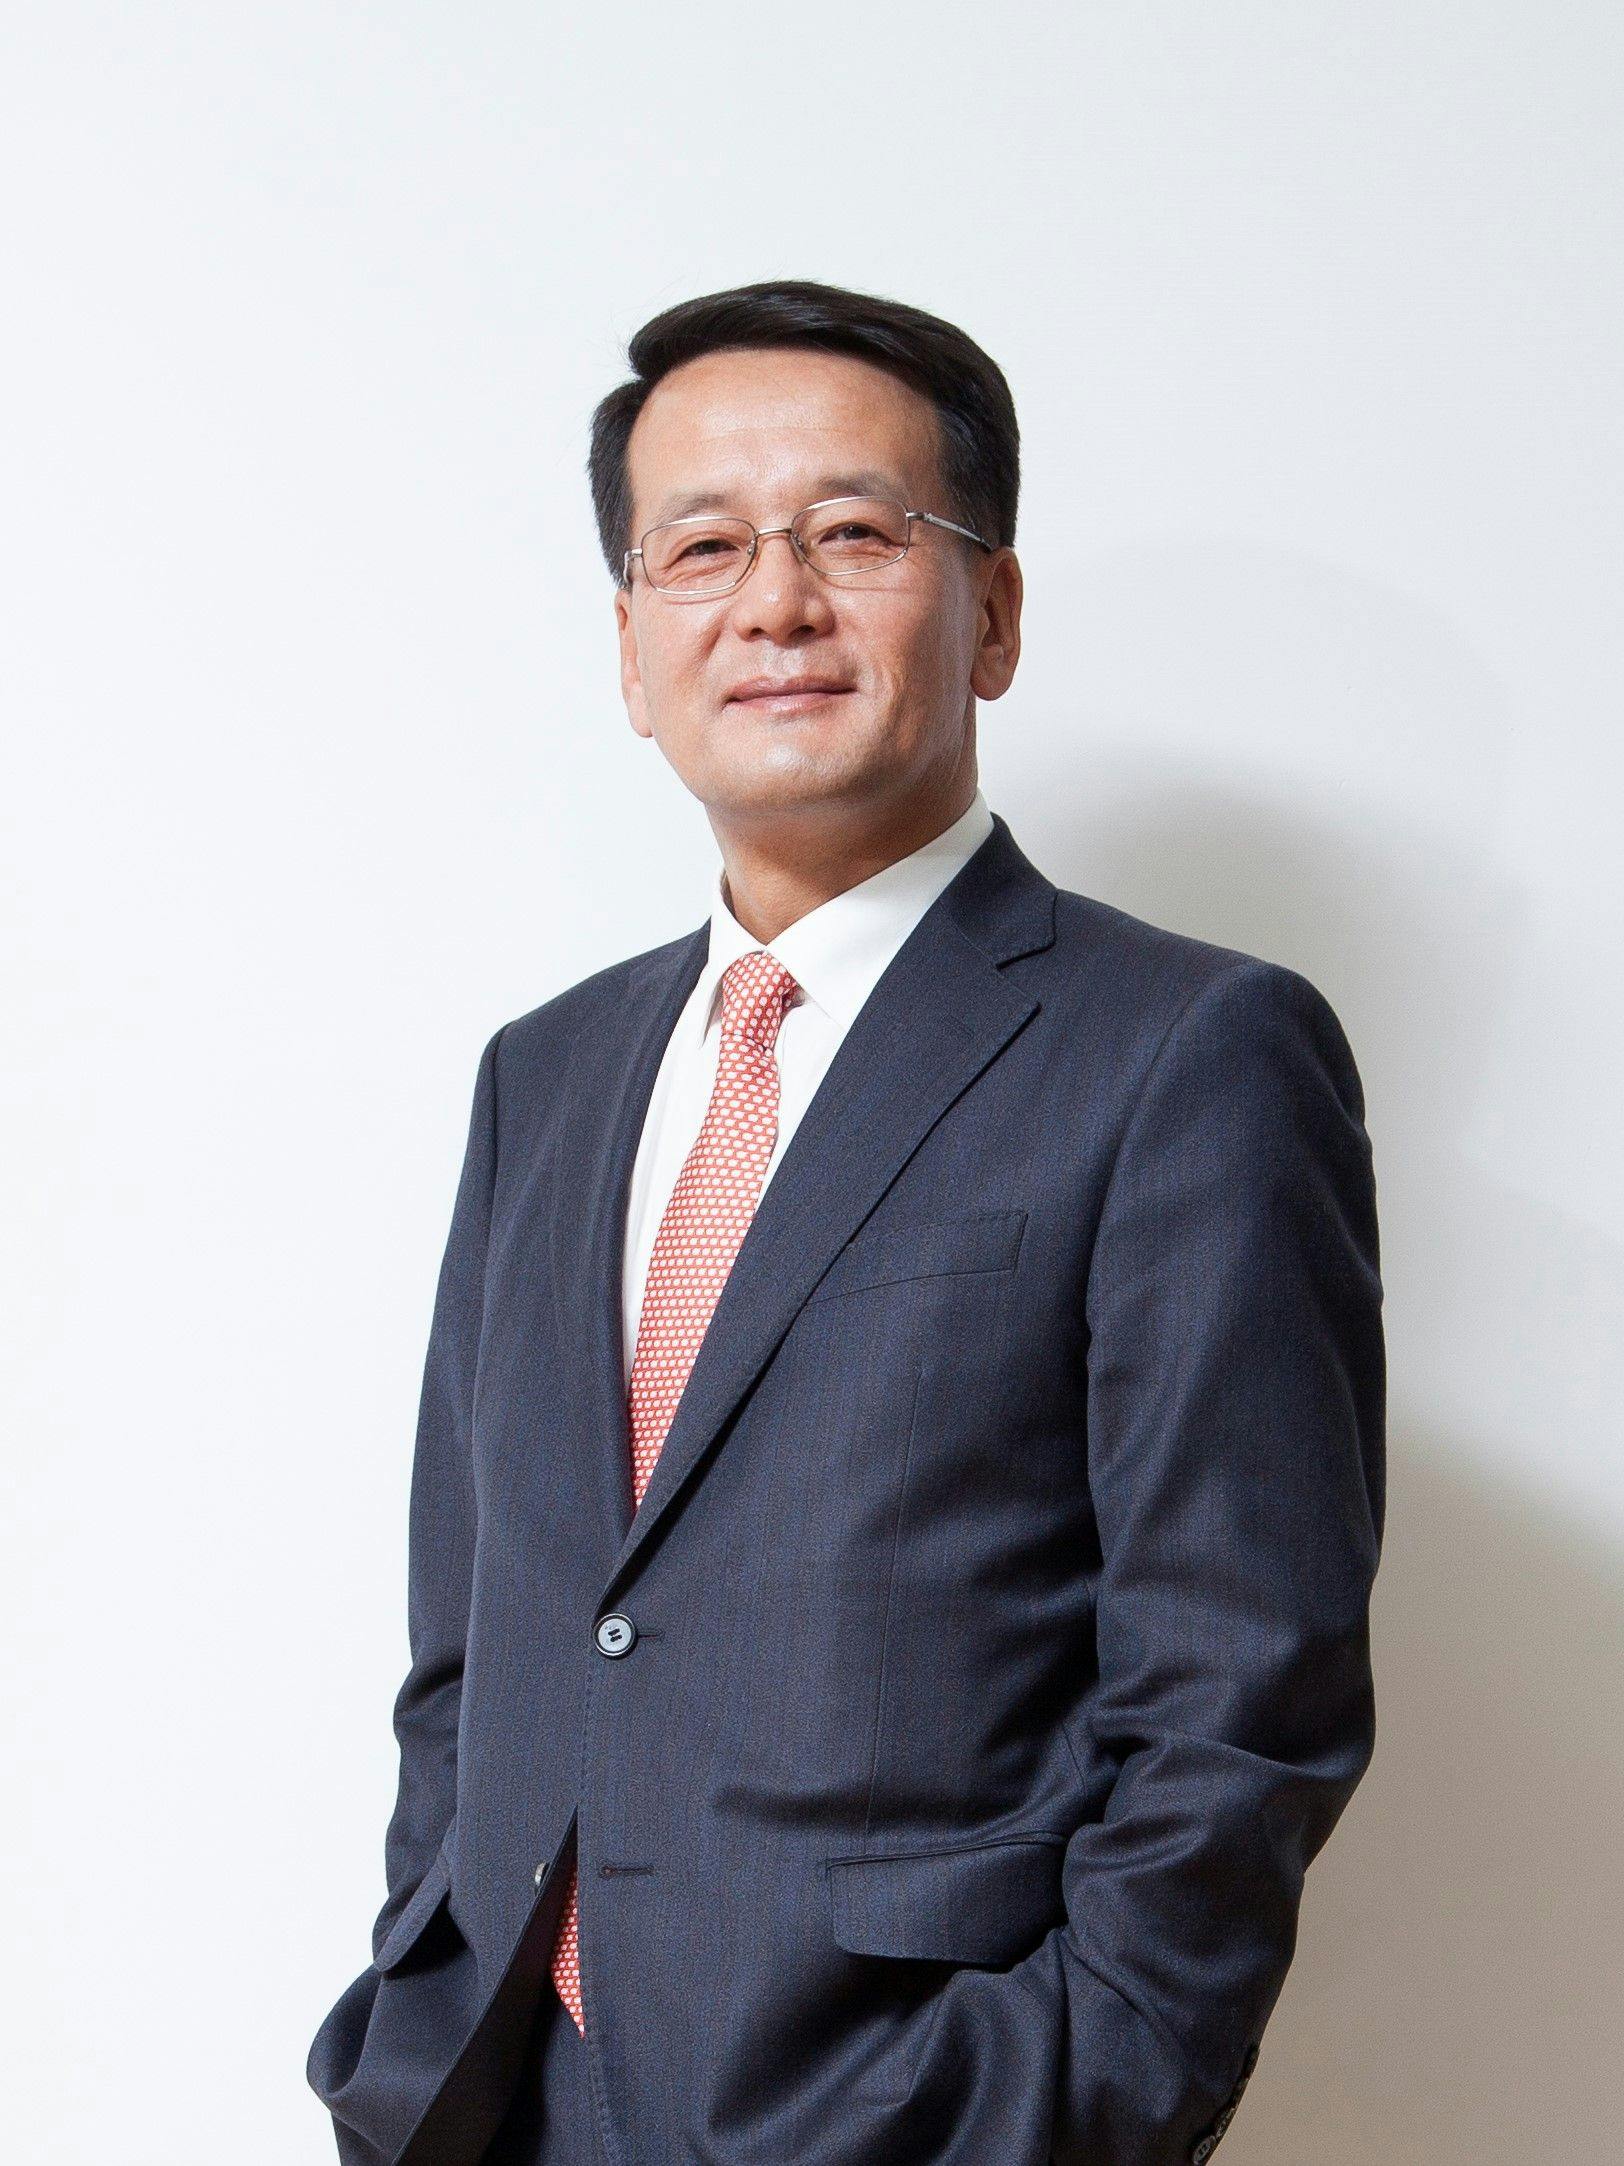 Hyoung Ki Kim, vice chairman and co-CEO of Celltrion Healthcare